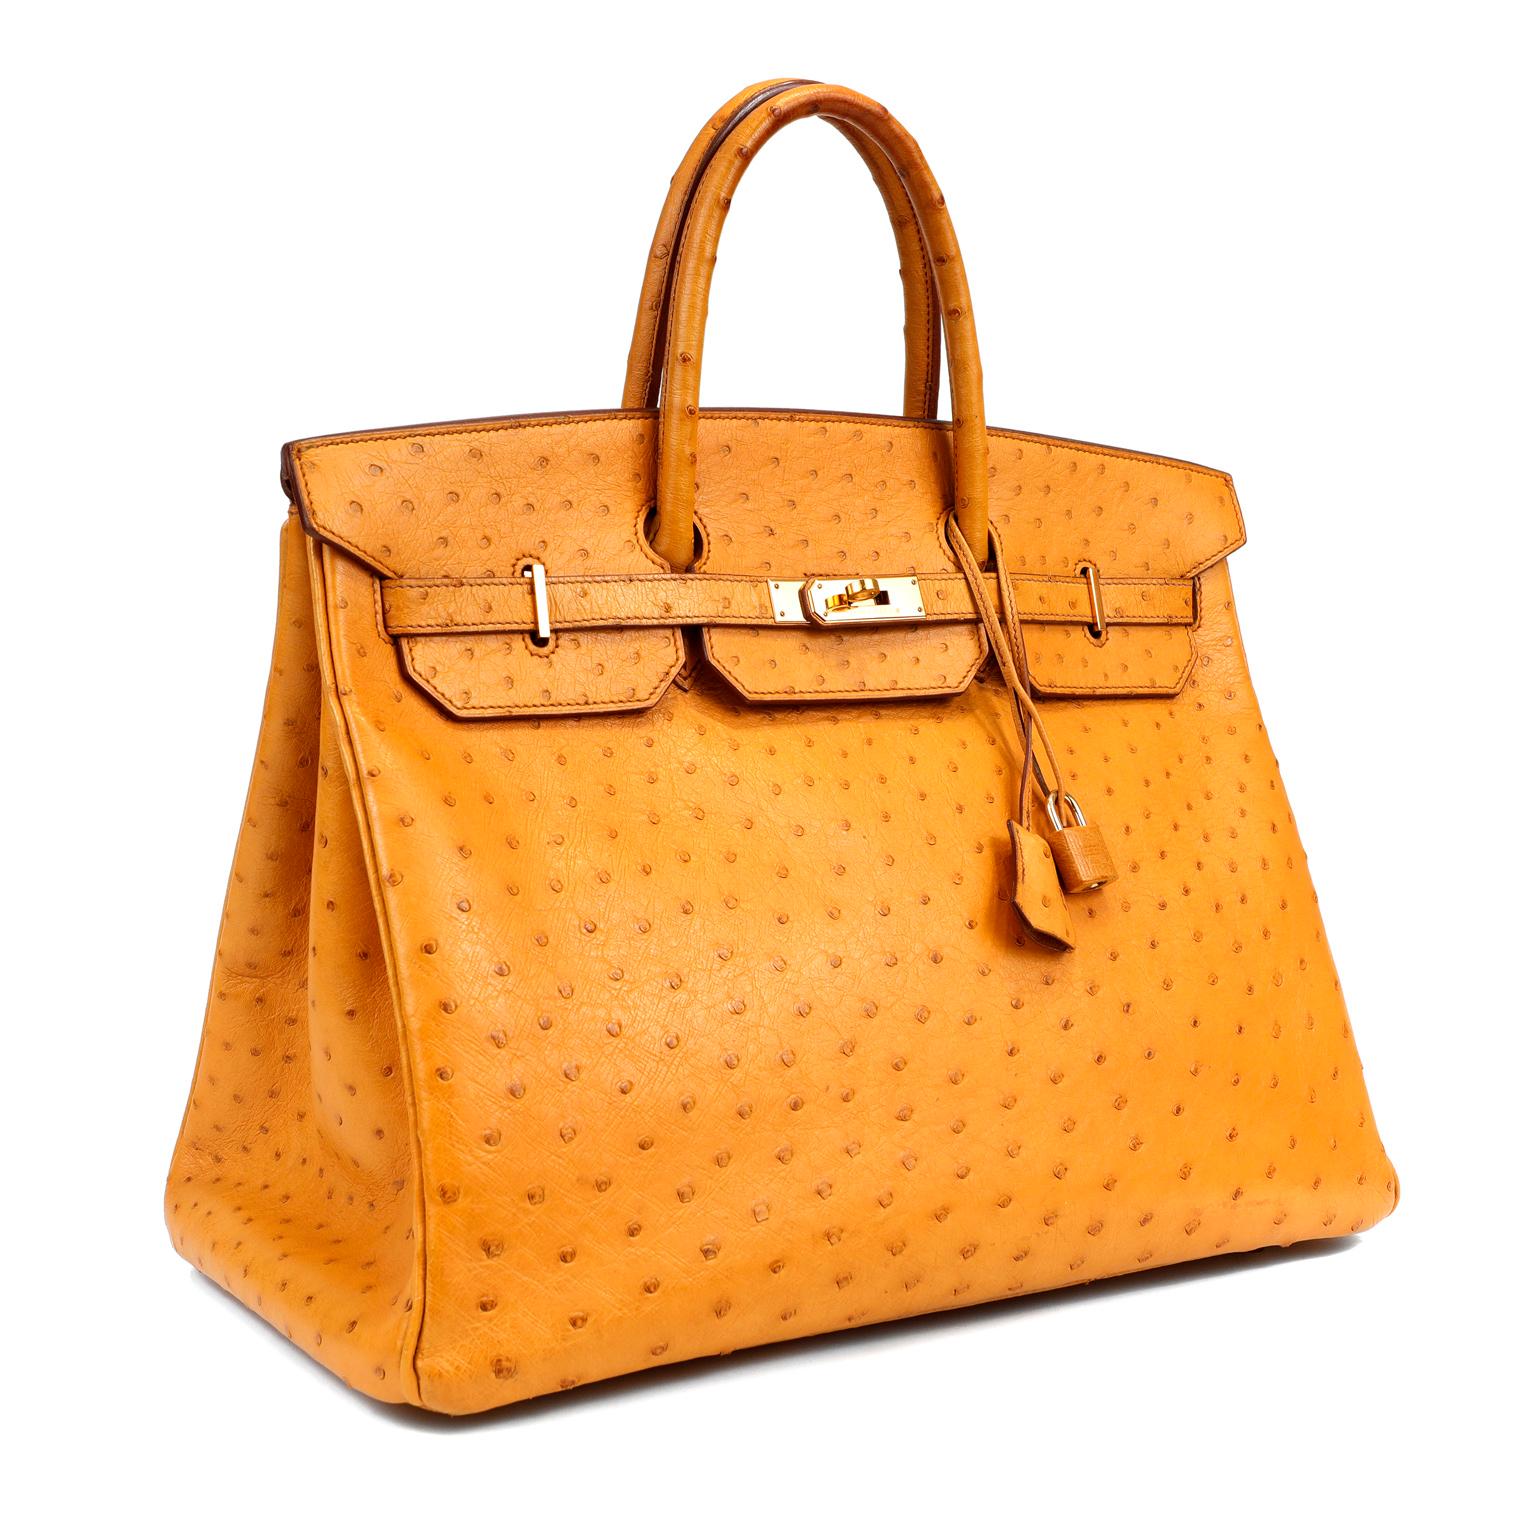 This authentic Hermès Honey Ostrich 40 cm Birkin appears in pristine condition from the 1997 collection.   Hermès bags are considered the ultimate luxury item the world over.  Hand stitched by skilled craftsmen, wait lists of a year or more are